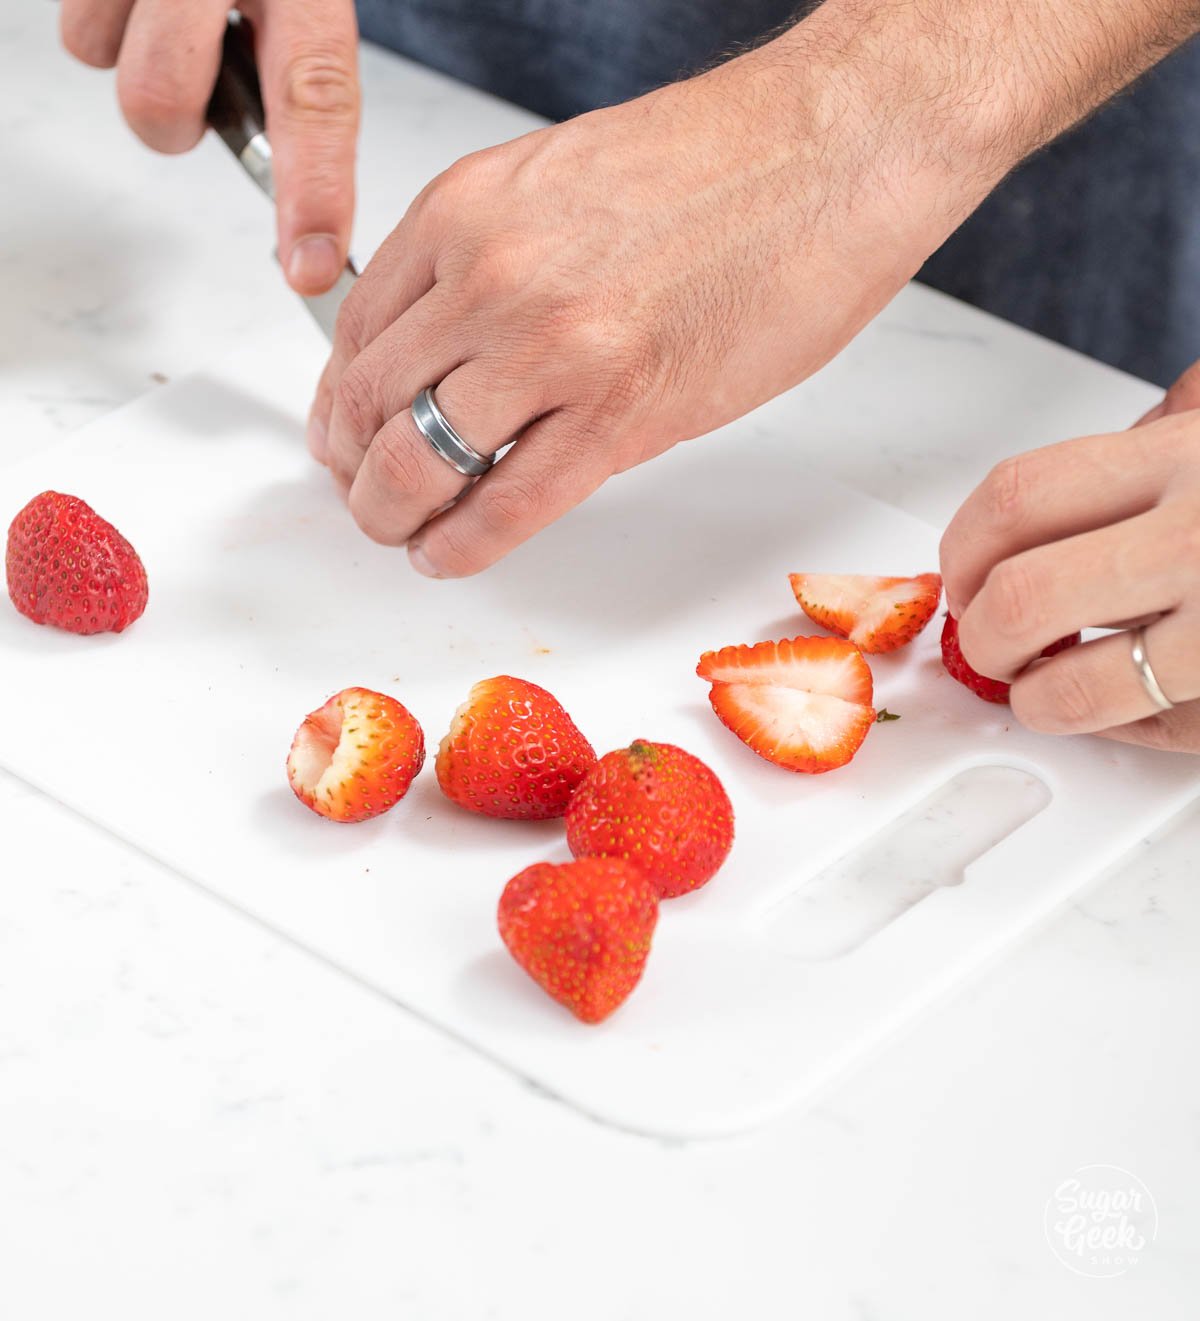 hands shown chopping up strawberries